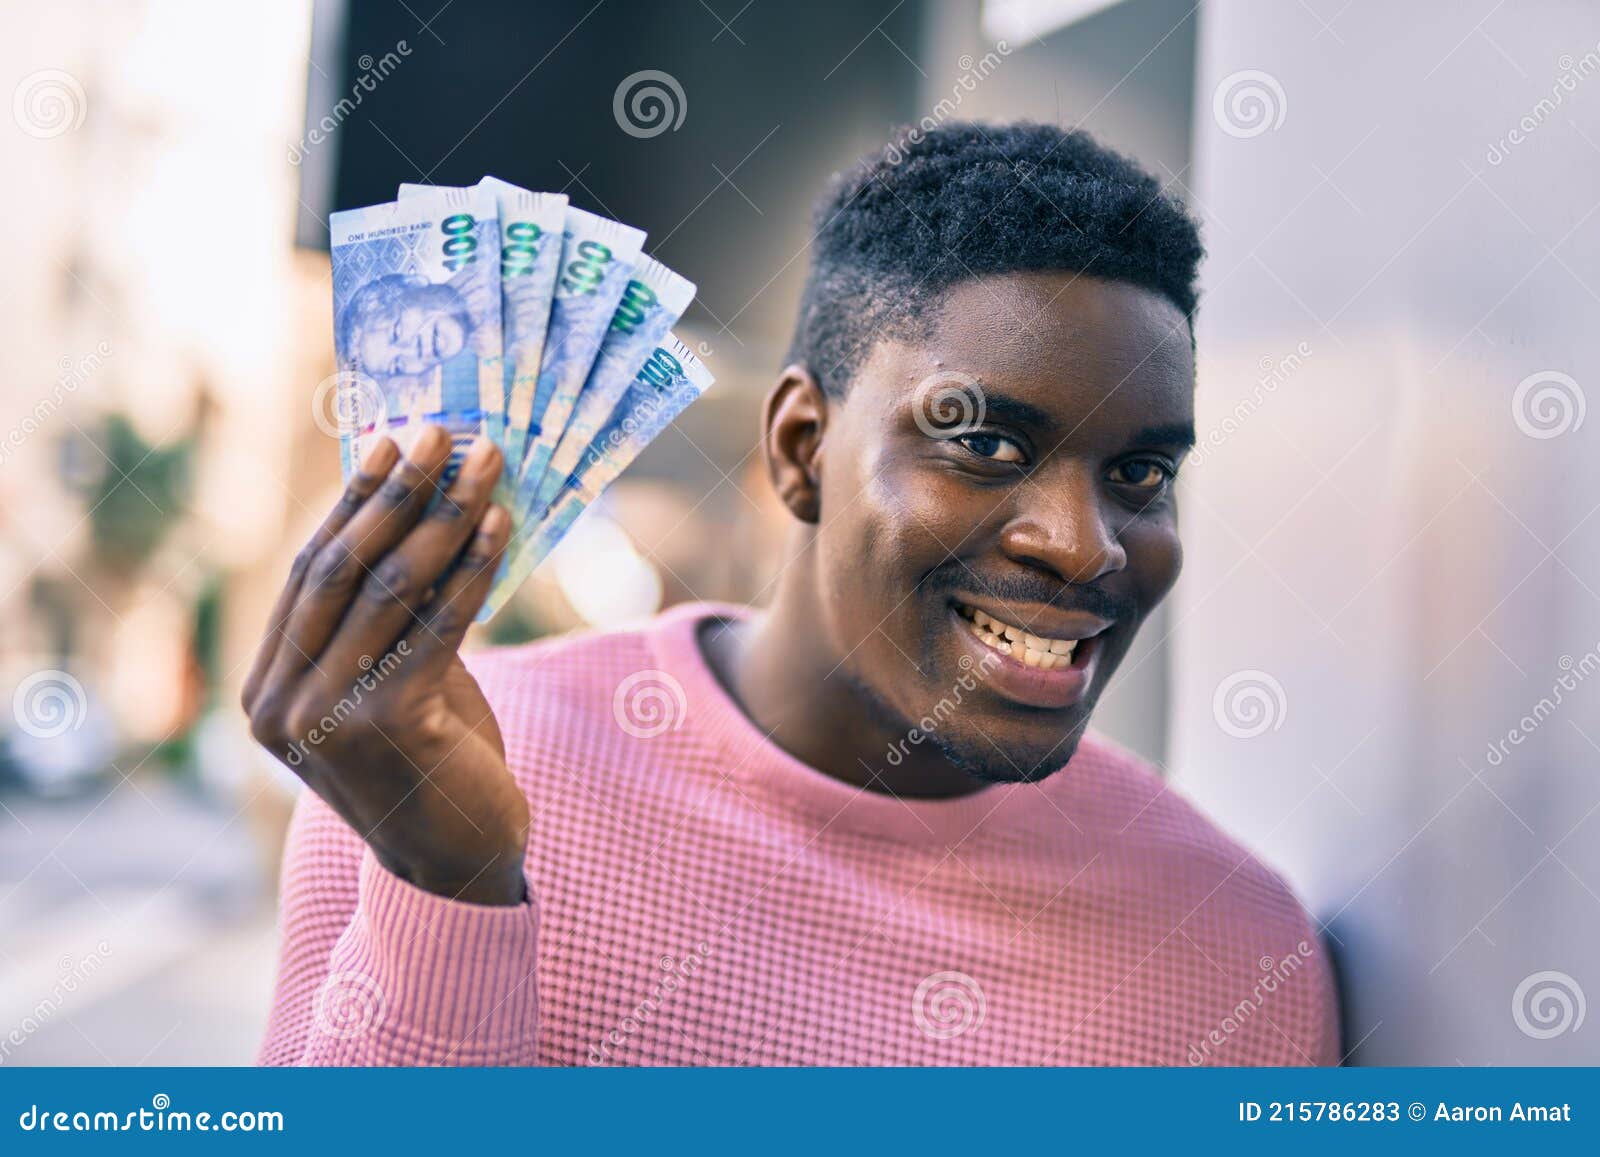 young african american man smiling happy holding south africa rands at the city